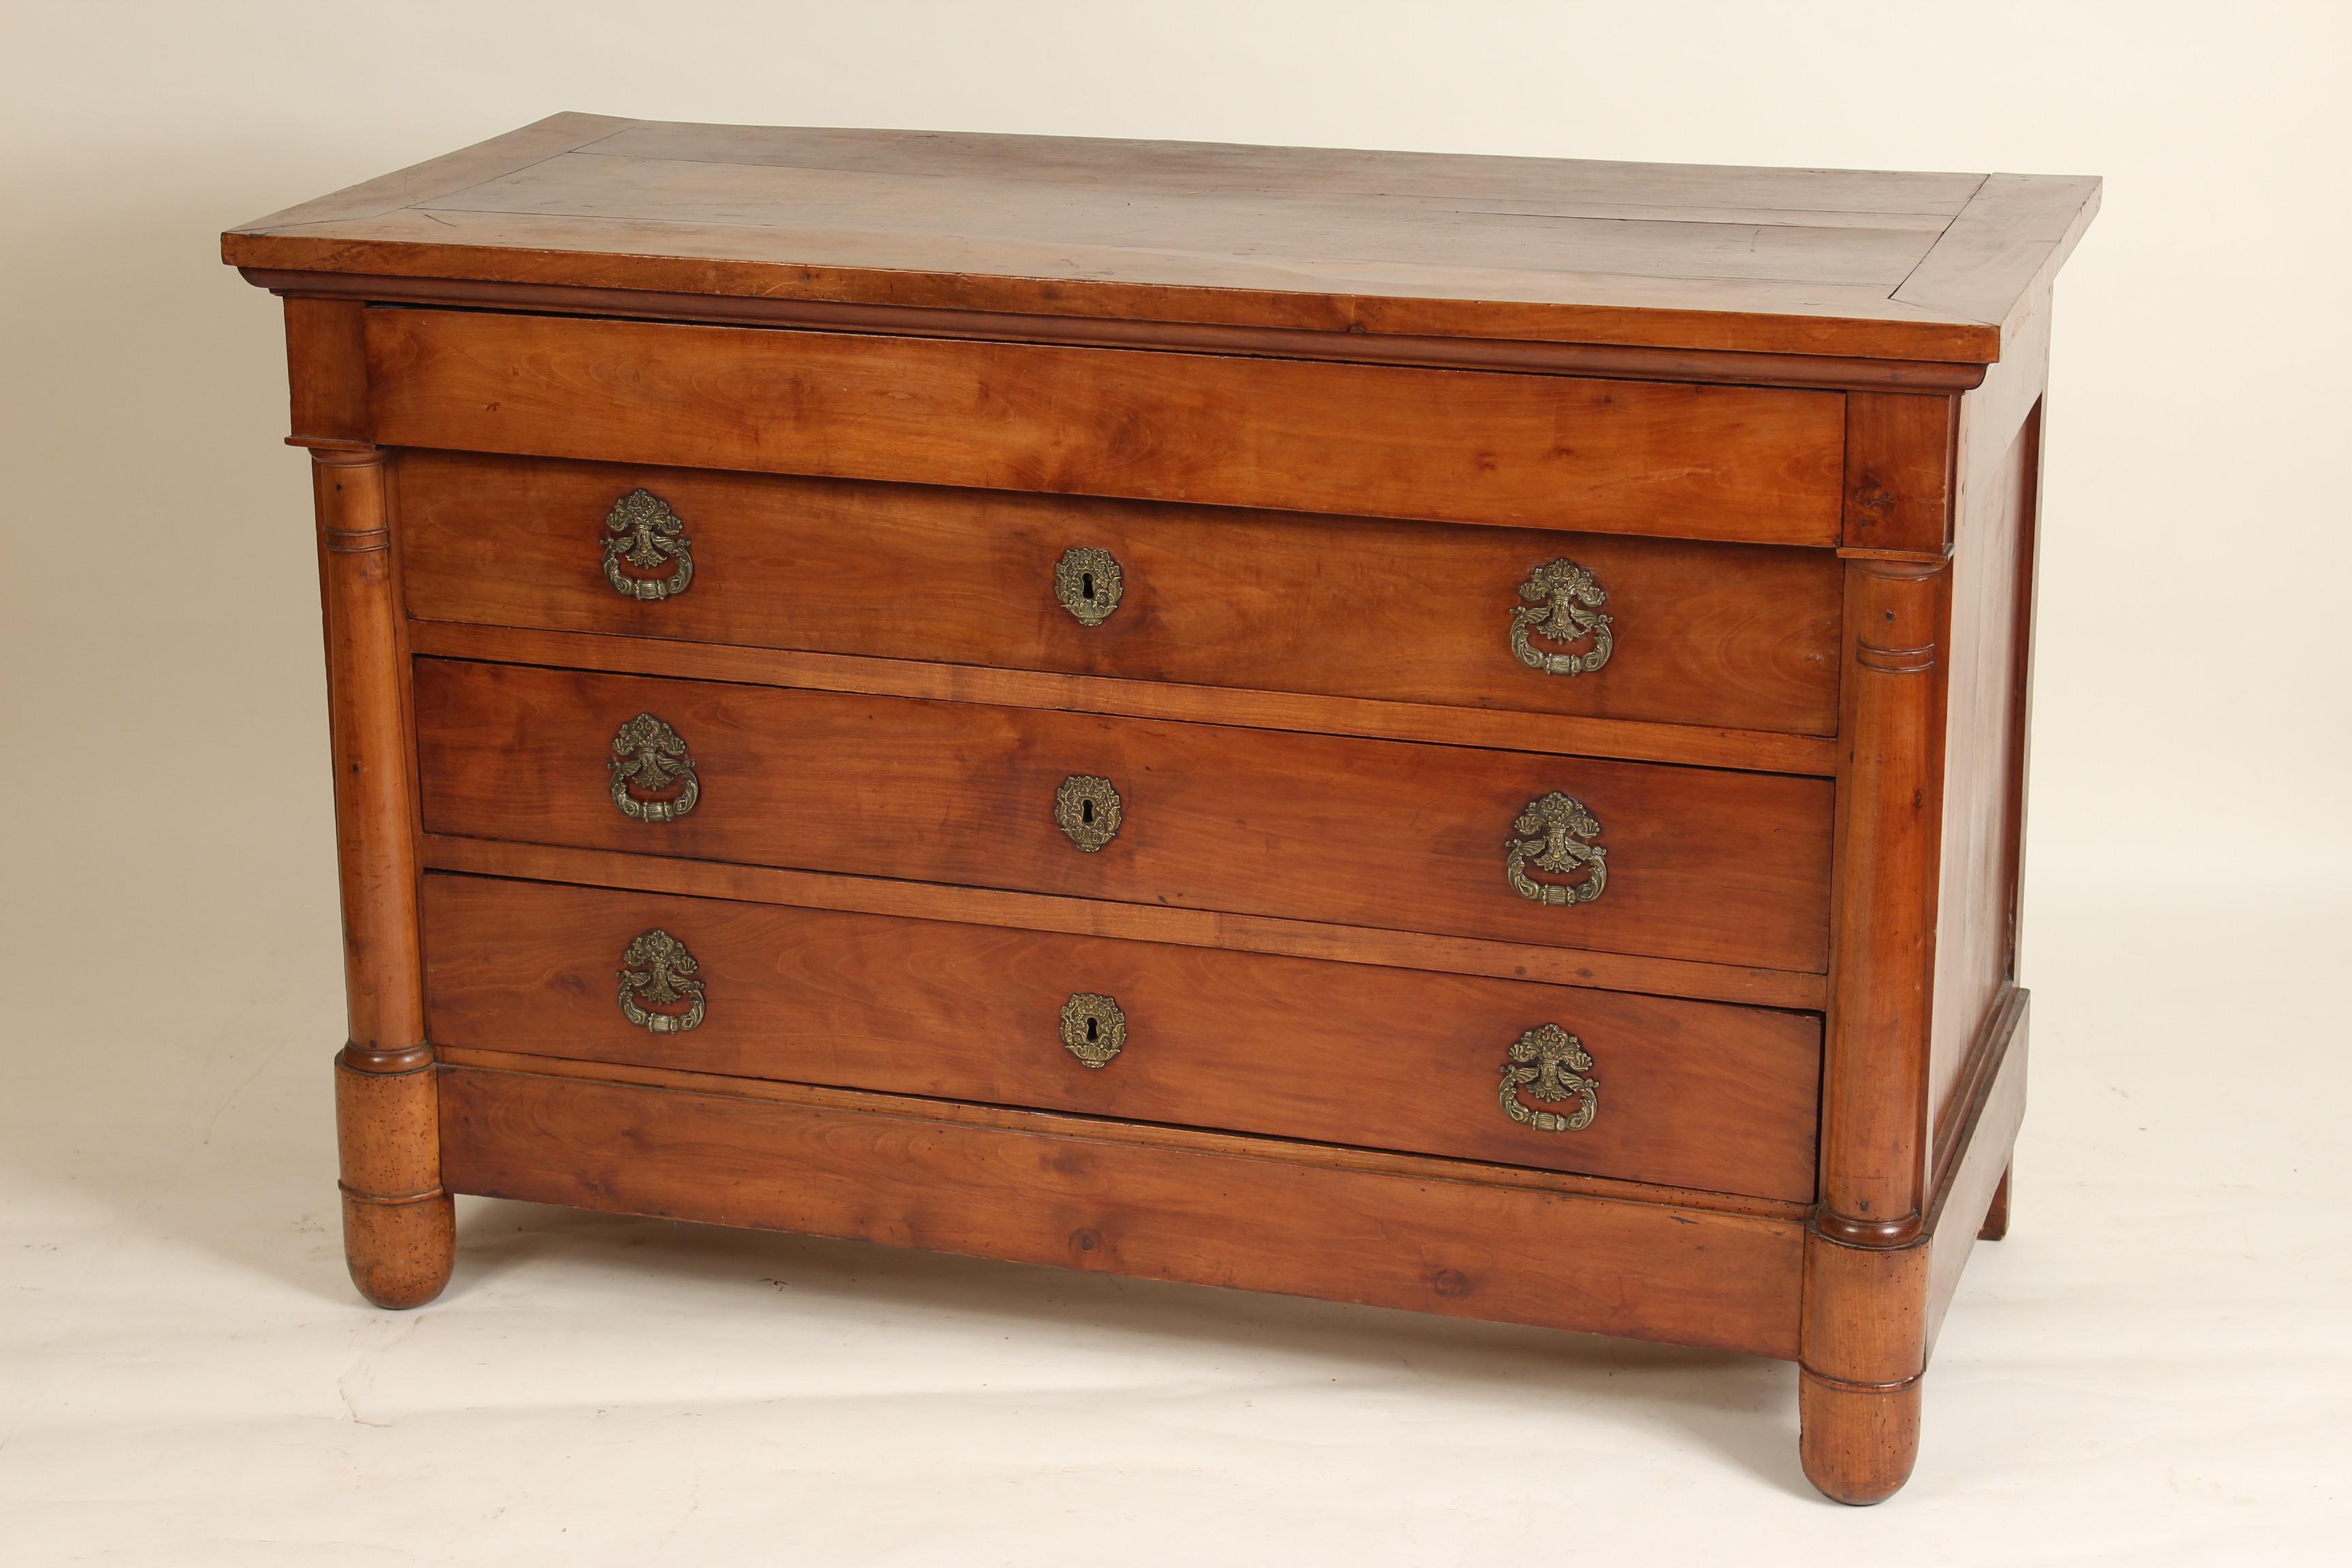 European Antique Empire Fruit Wood Chest of Drawers